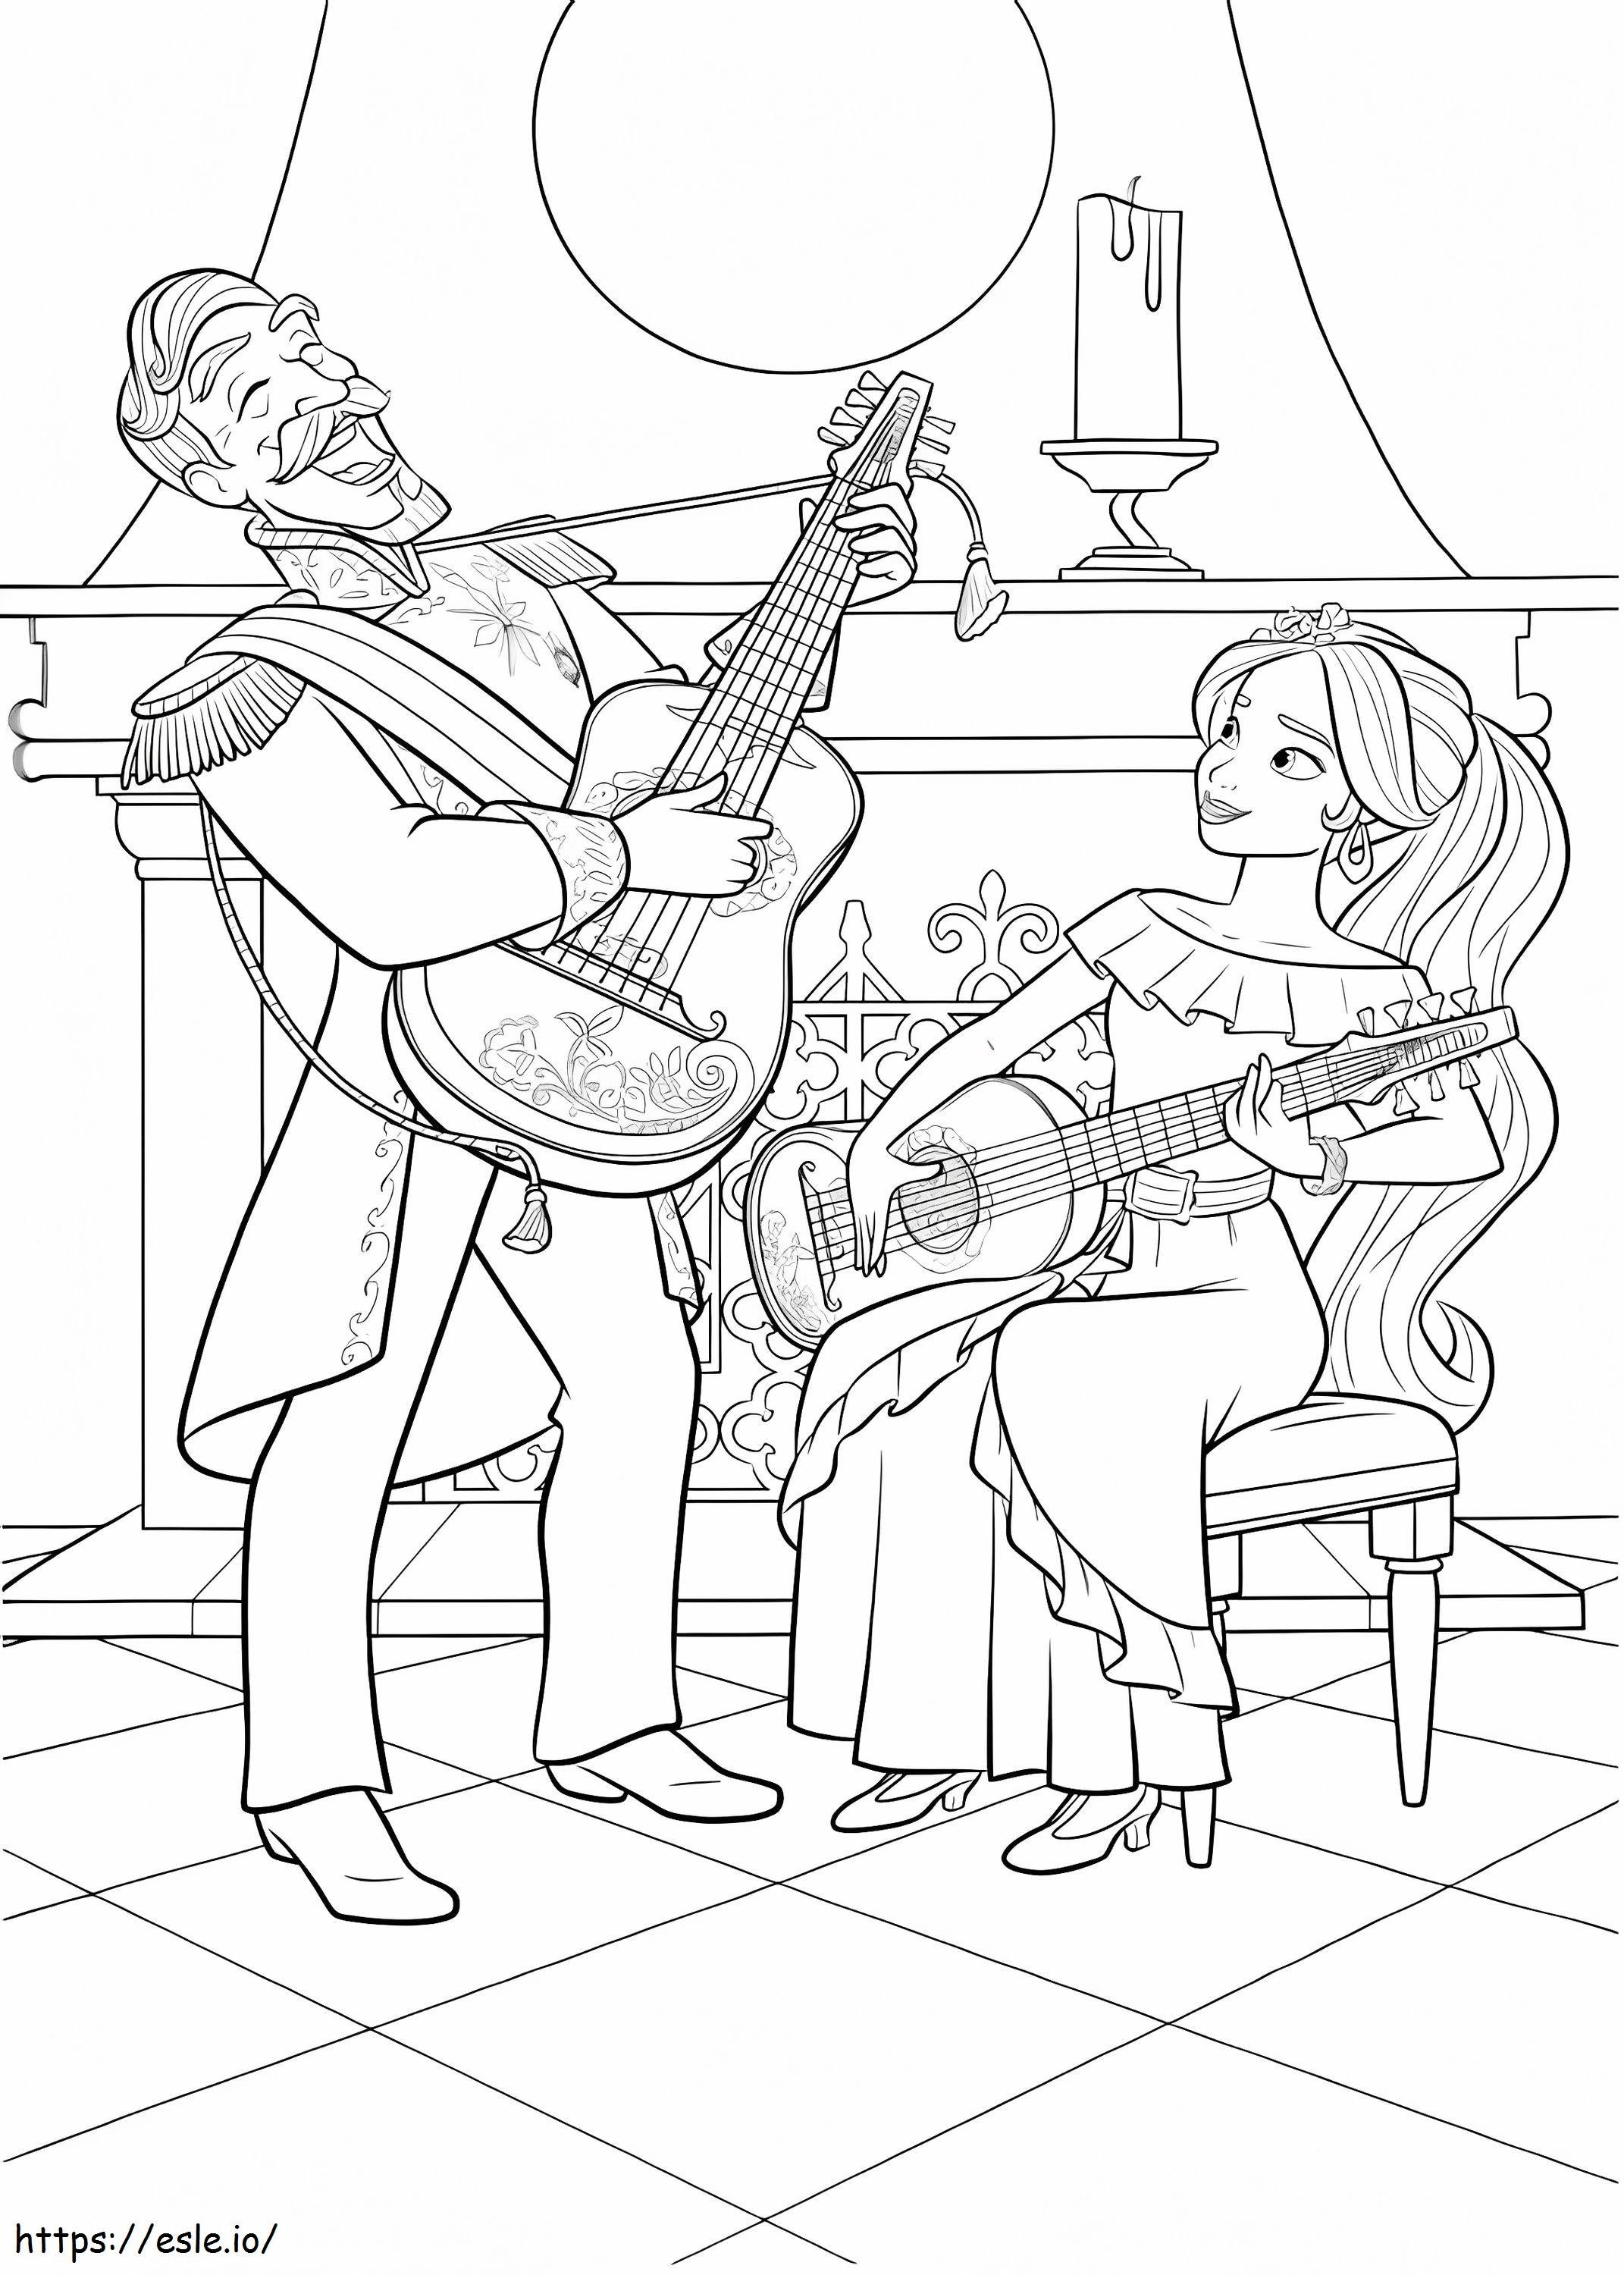 1535075694 Elena Playing Guitar A4 coloring page